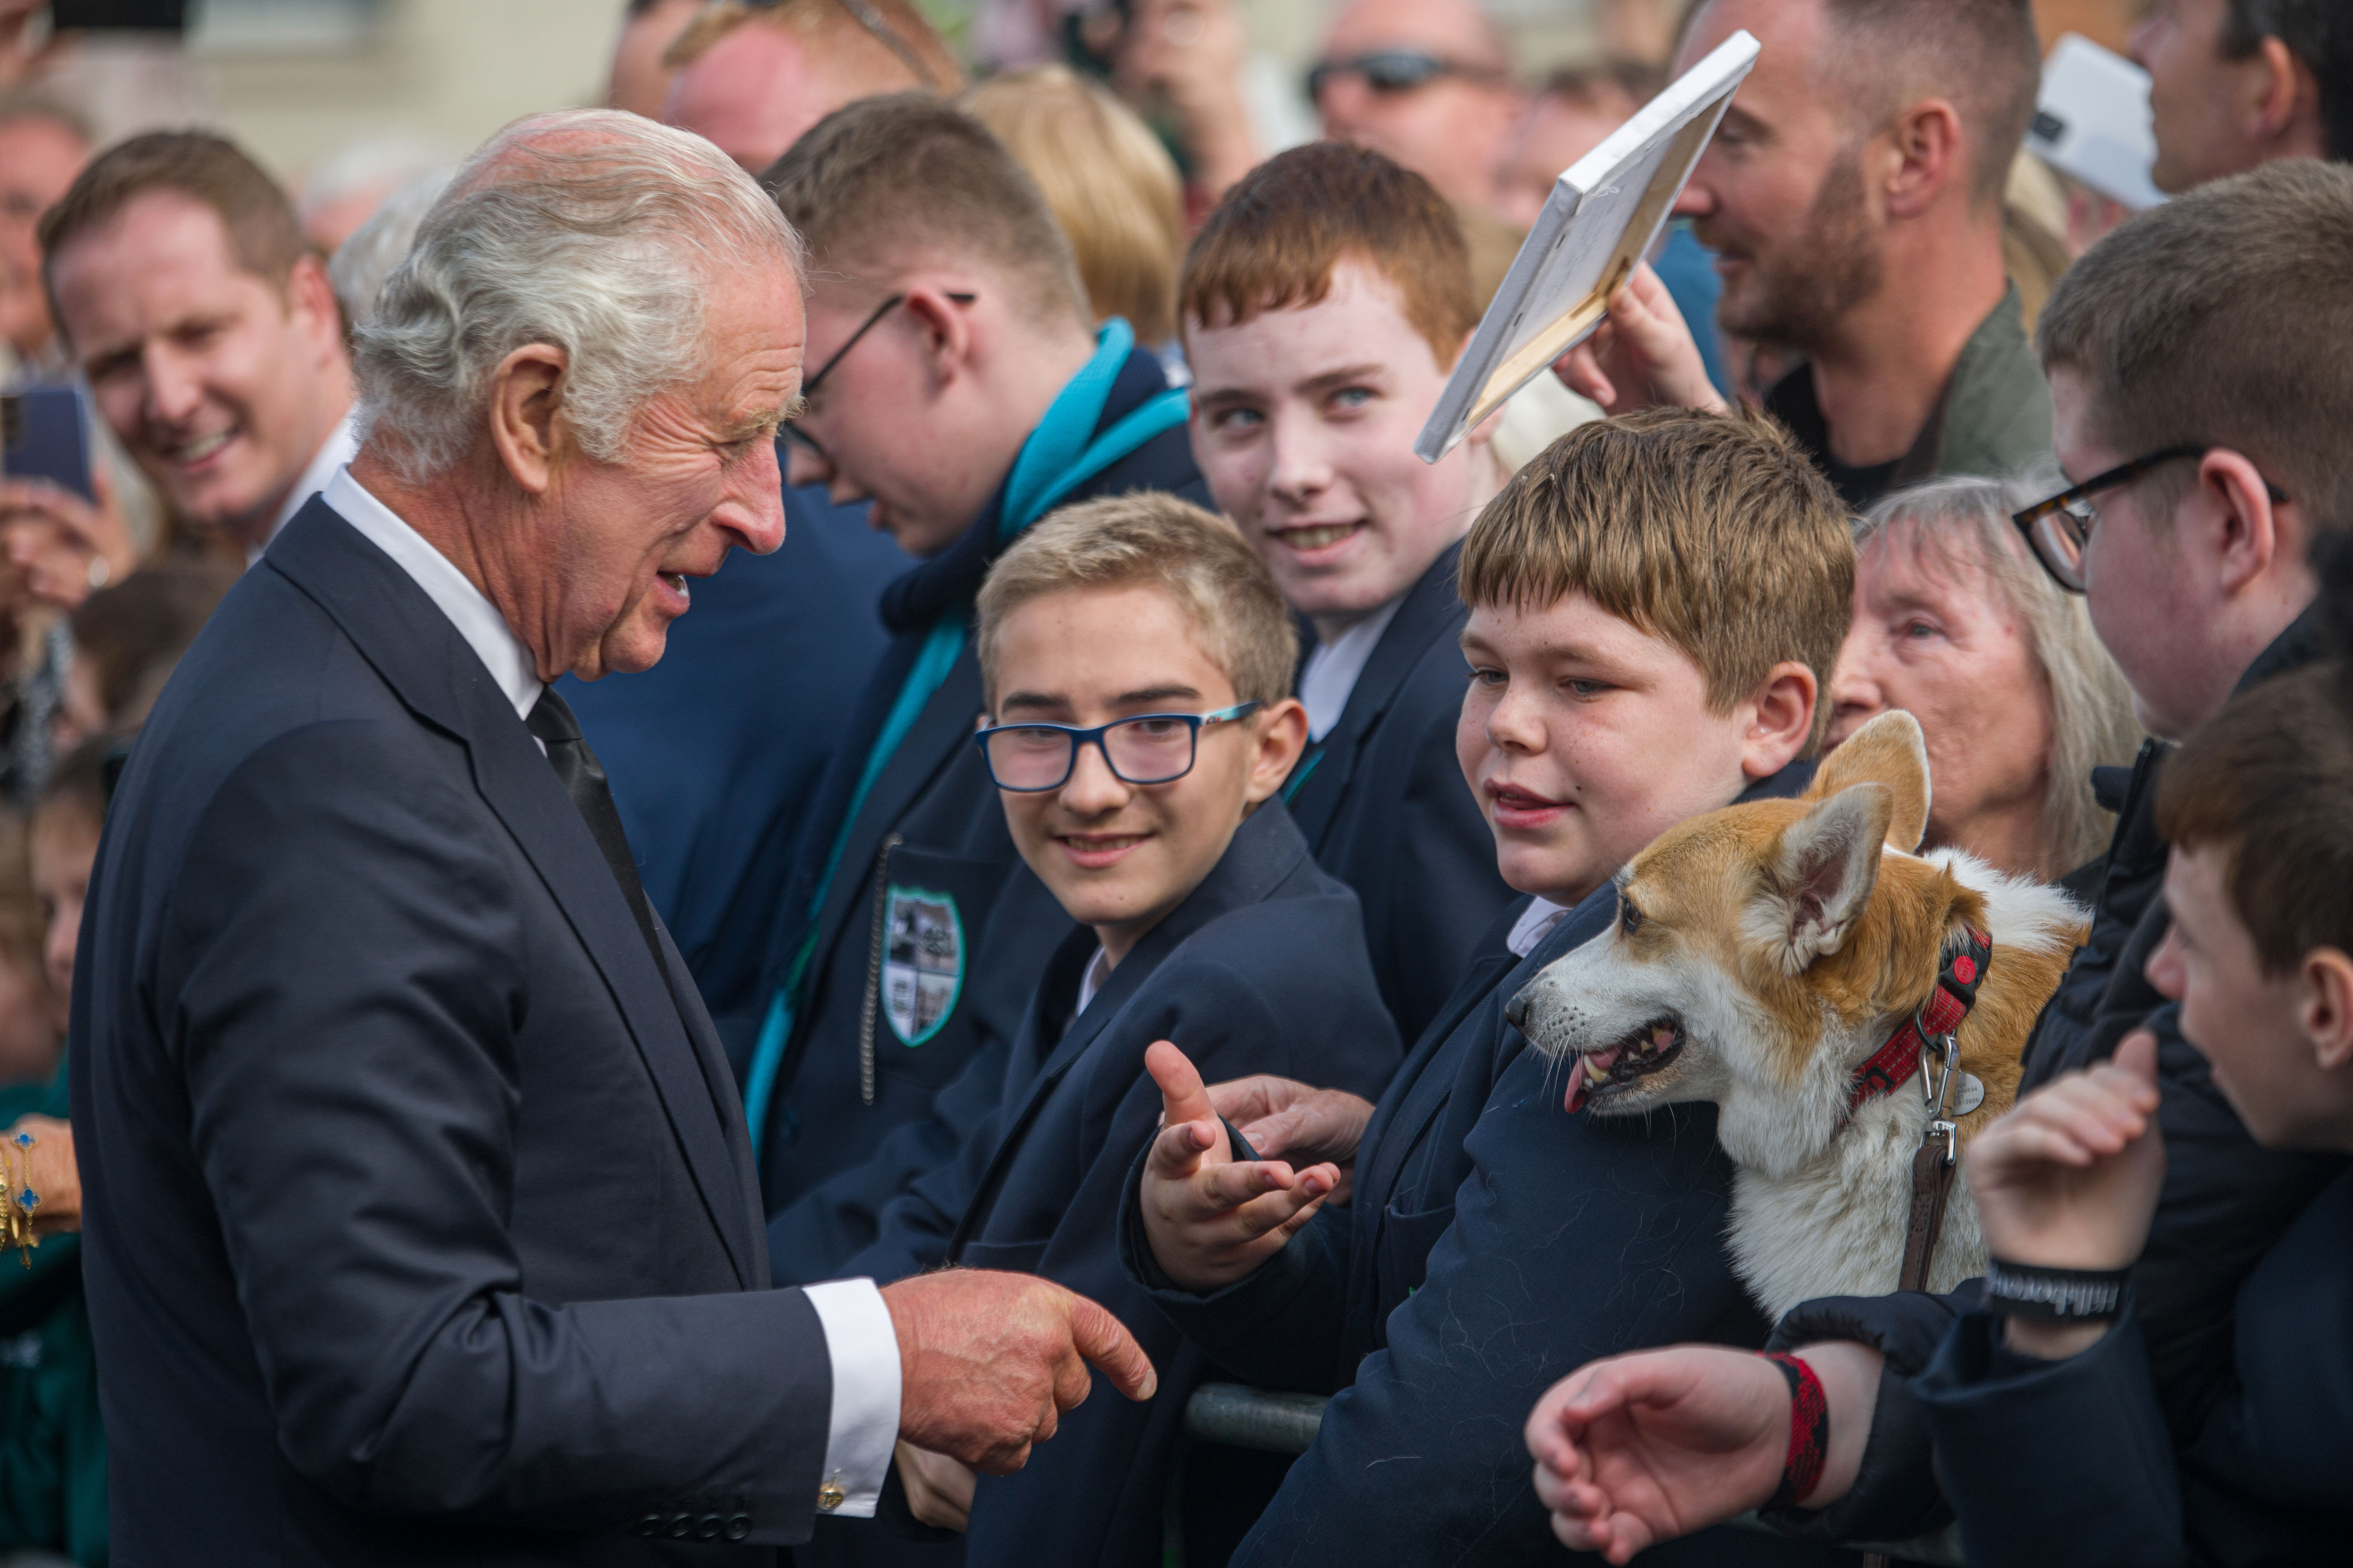 <p>King Charles III greeted well-wishers -- including some children and their adorable corgi, which was the late Queen Elizabeth's II's favorite dog breed -- outside Hillsborough Castle in Belfast, Northern Ireland, on Sept. 13, 2022. The new monarch traveled to the U.K. nation to receive tributes from pro-U.K. parties and the respectful sympathies of nationalists in the wake of the queen's death five days earlier.</p>